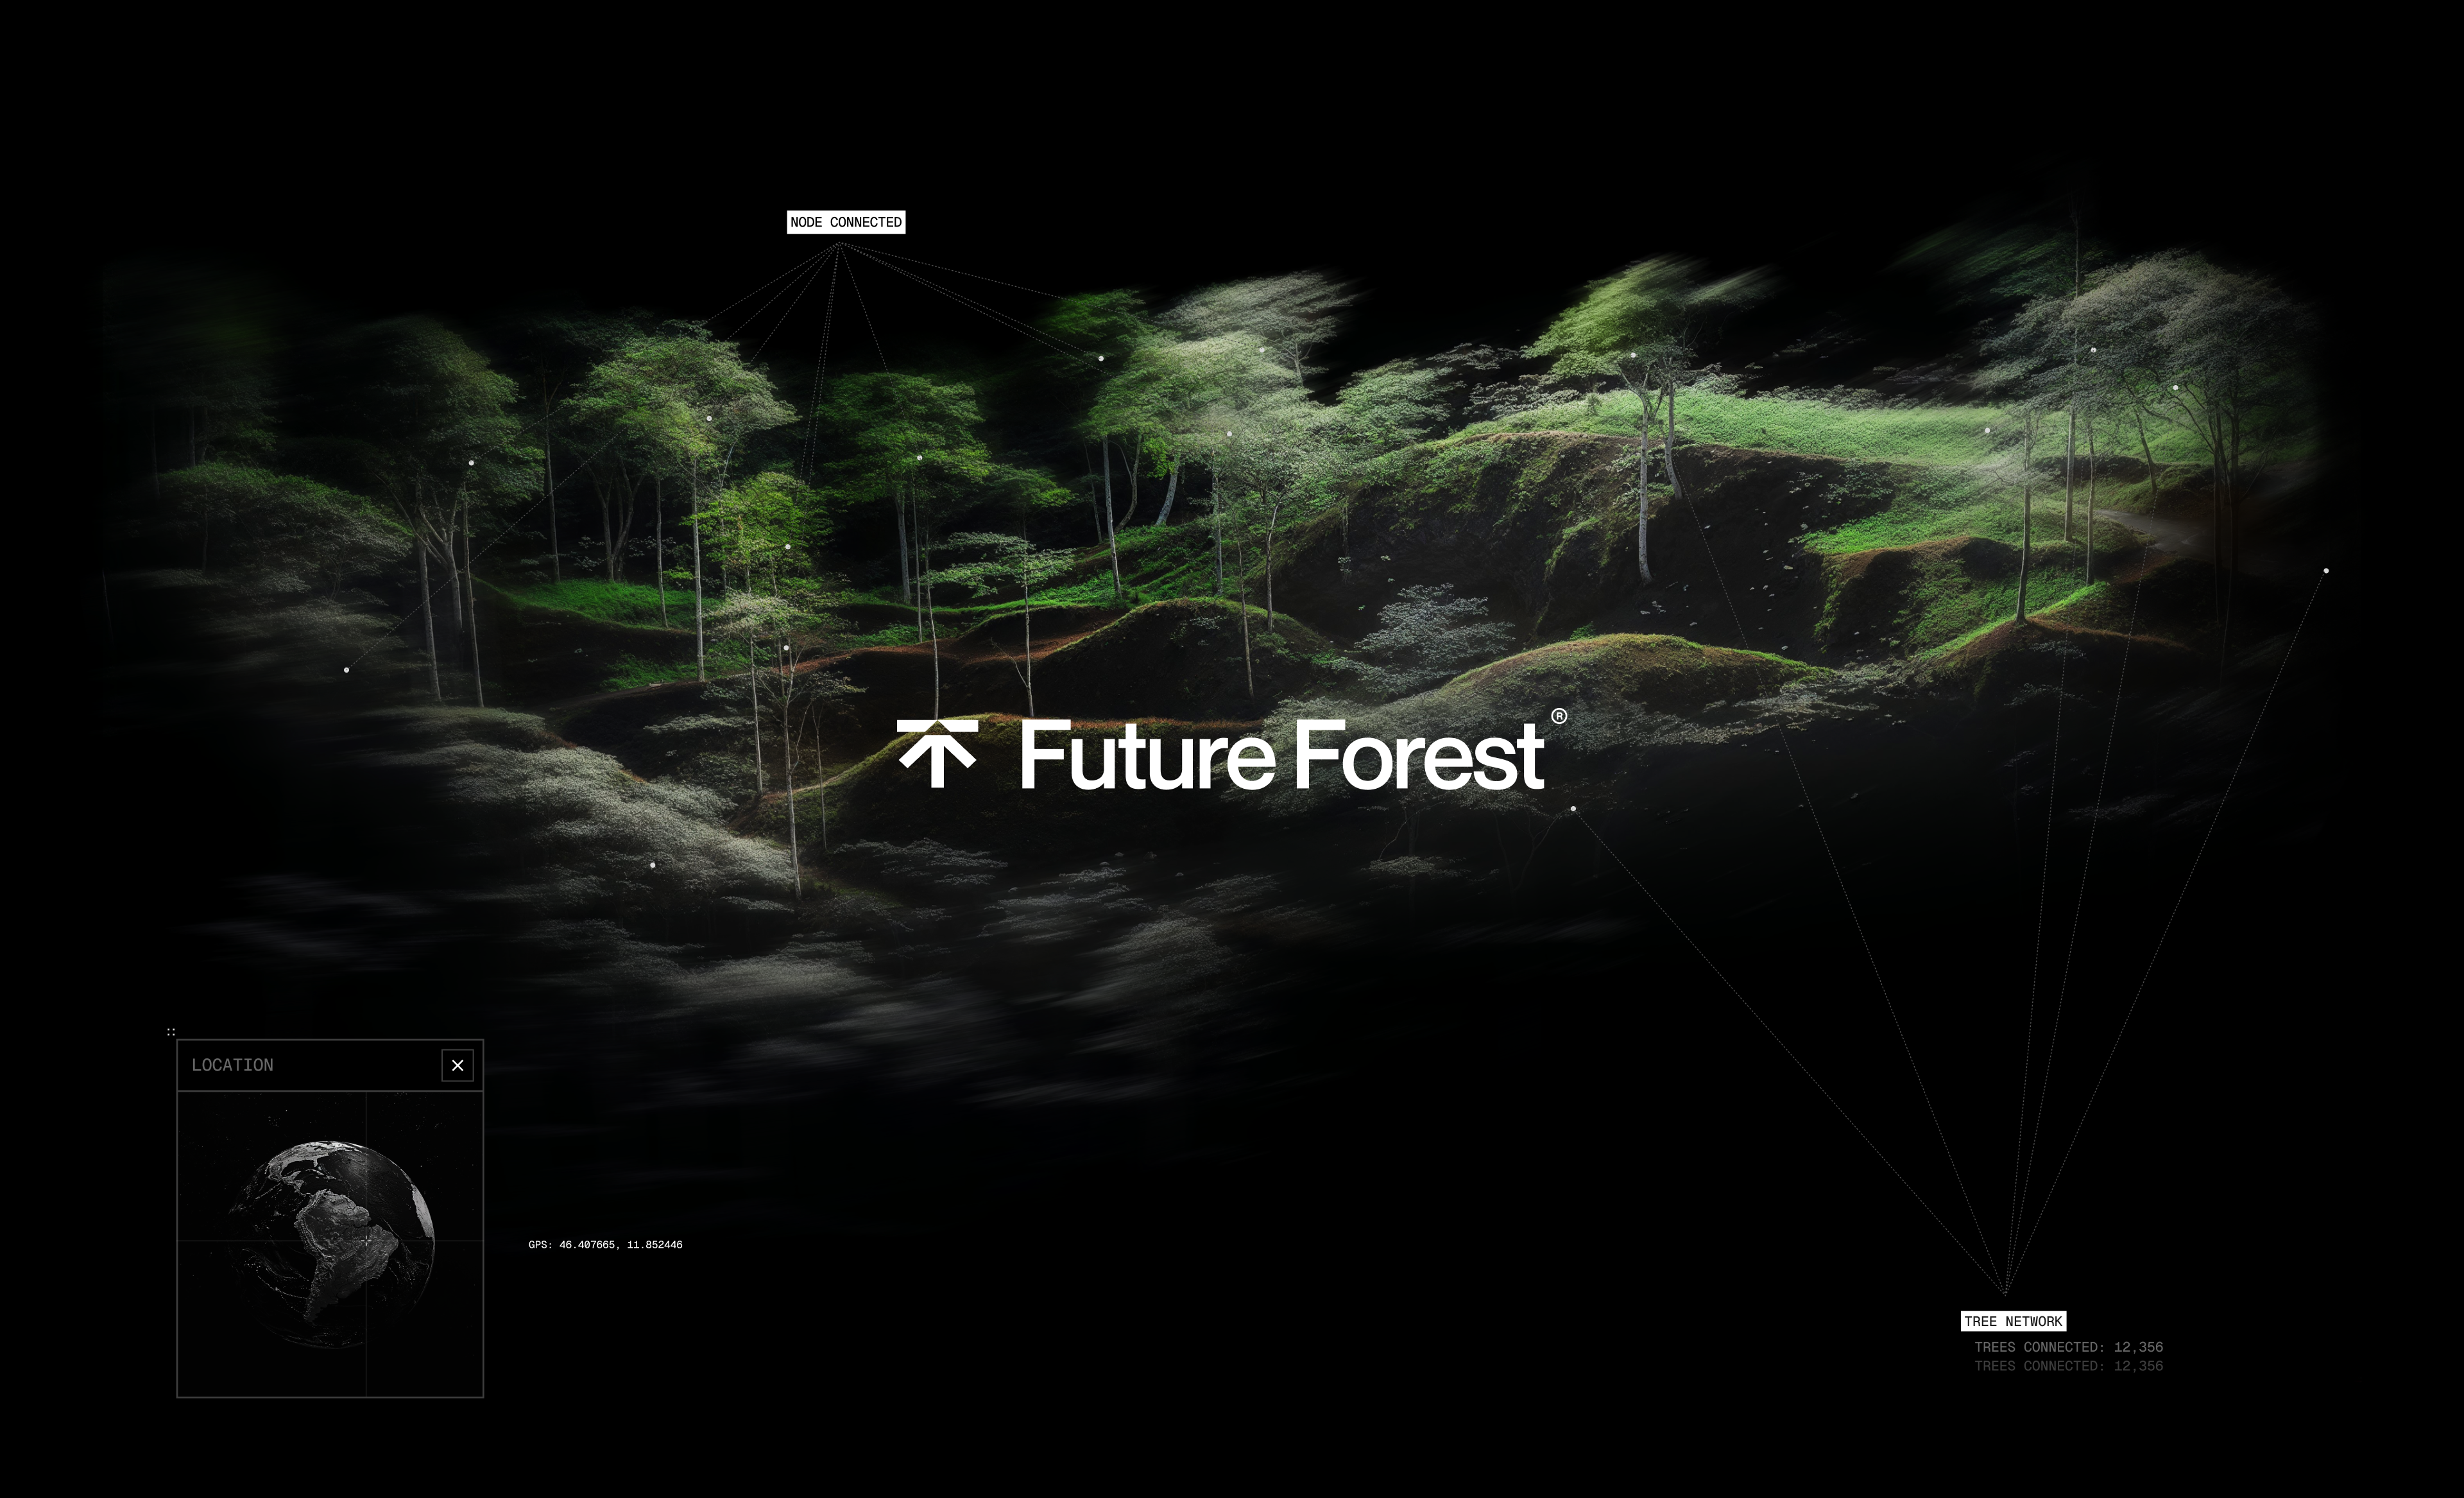 Future forest intro asset